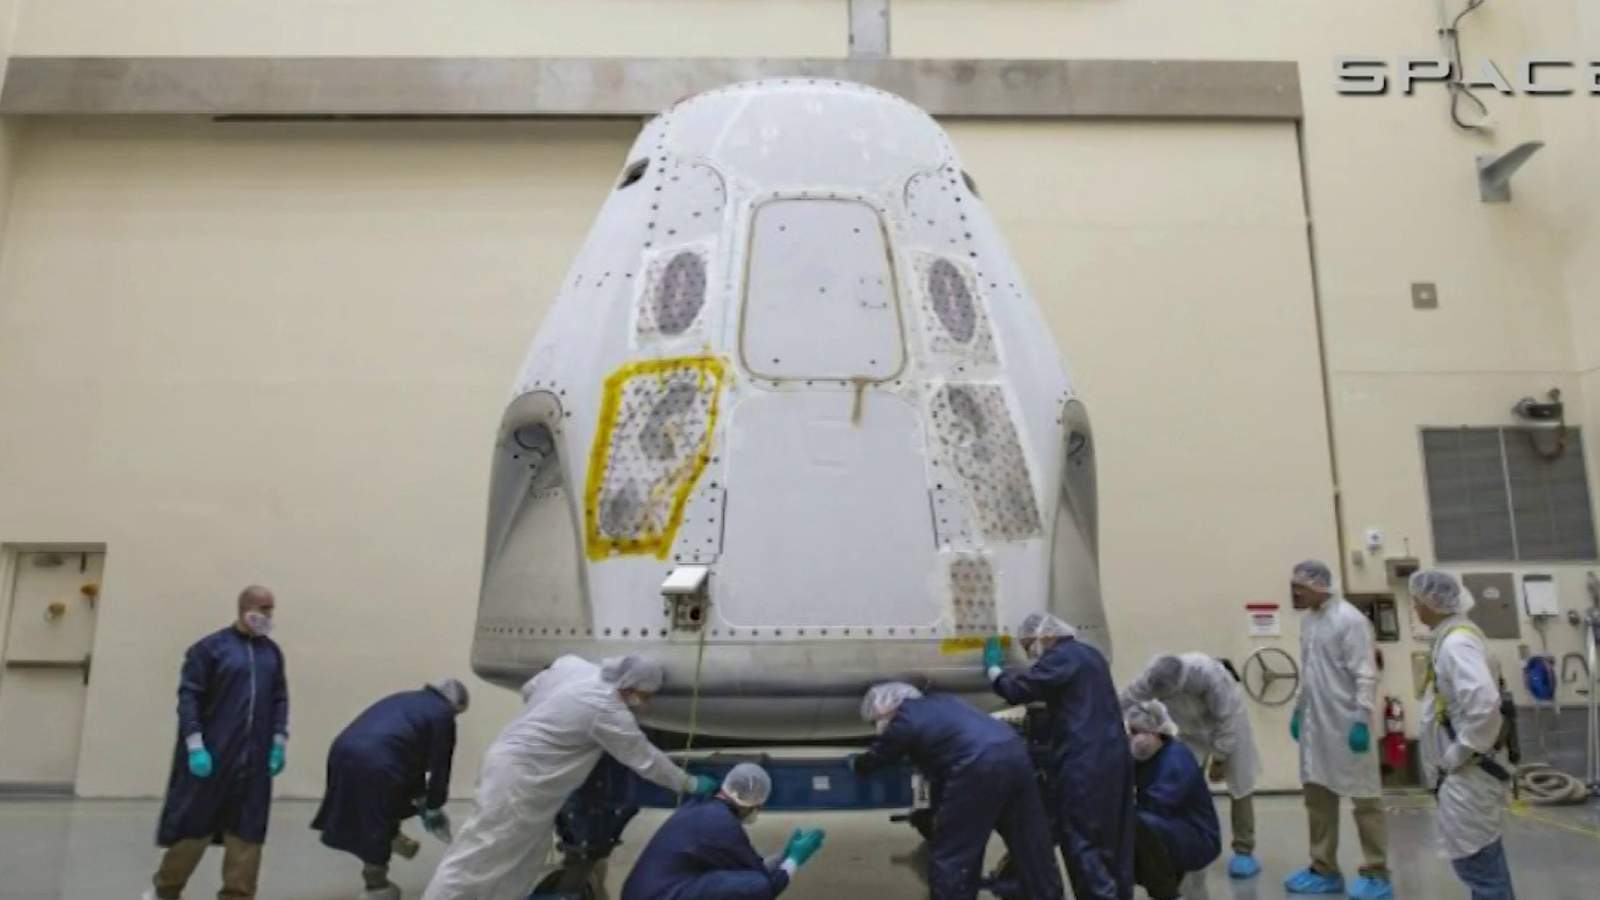 SpaceX Crew Dragon spacecraft arrives in Florida ahead of first astronaut flight